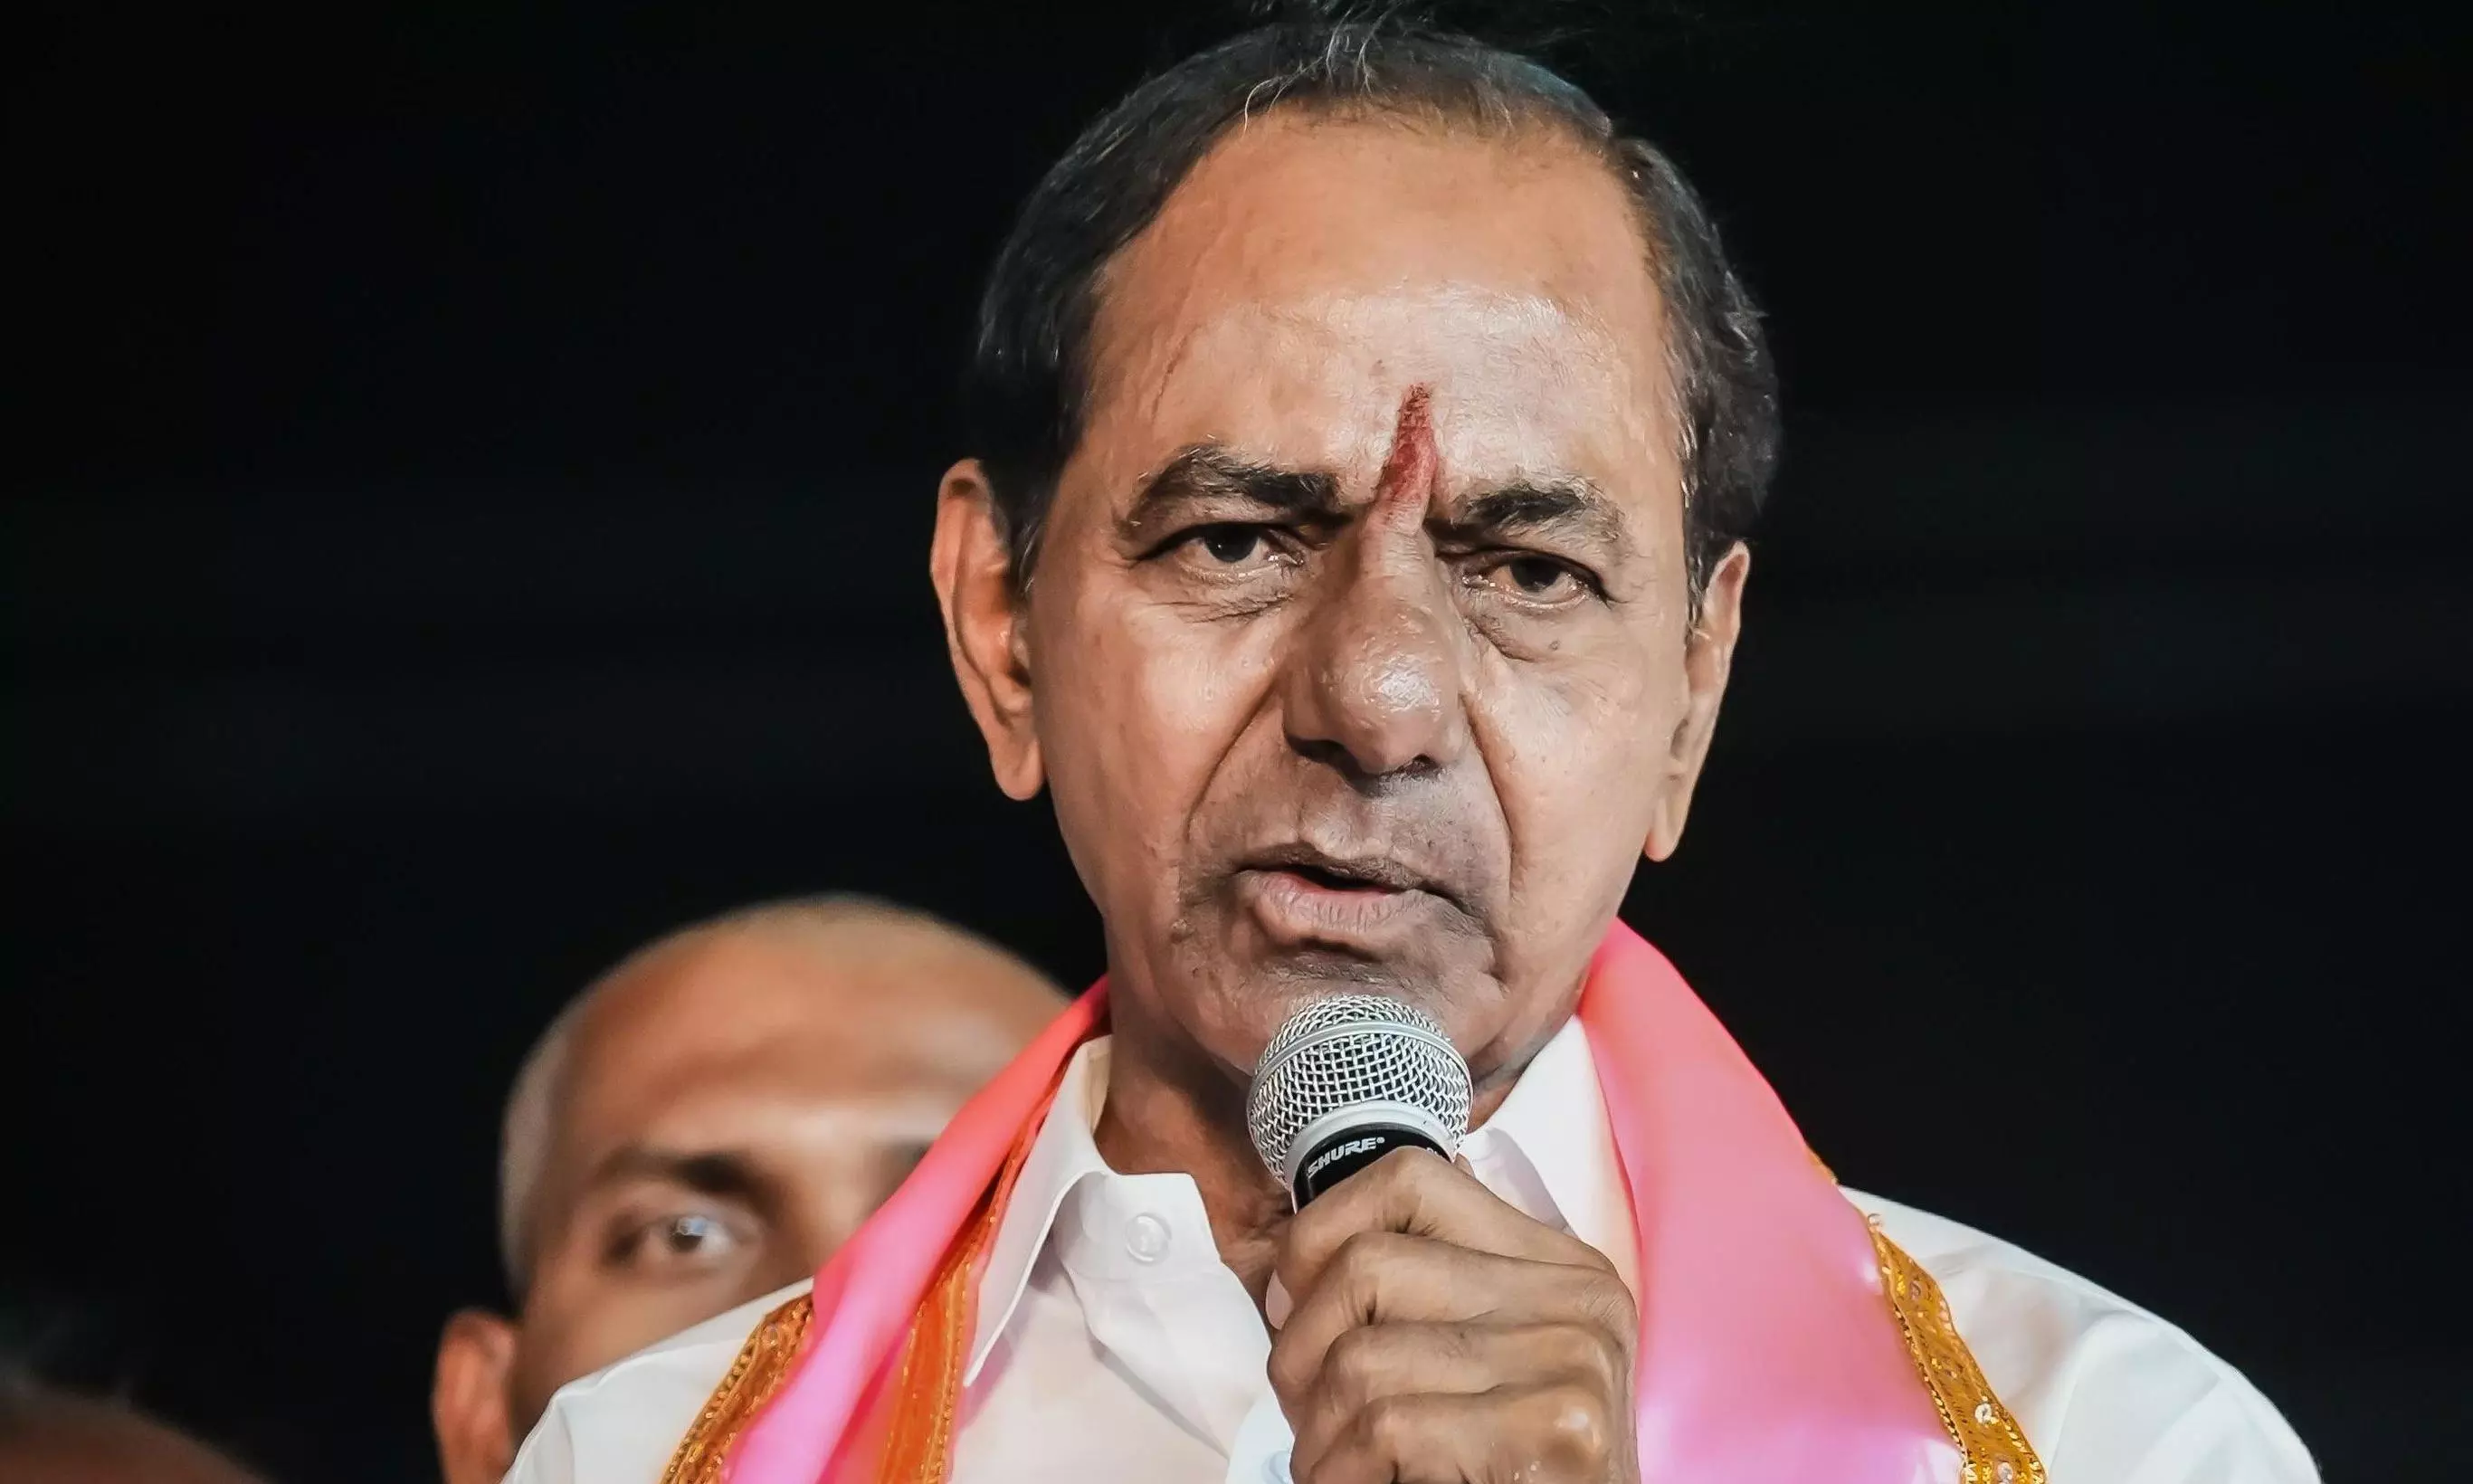 Inquiry Commission probing in biased manner, says KCR